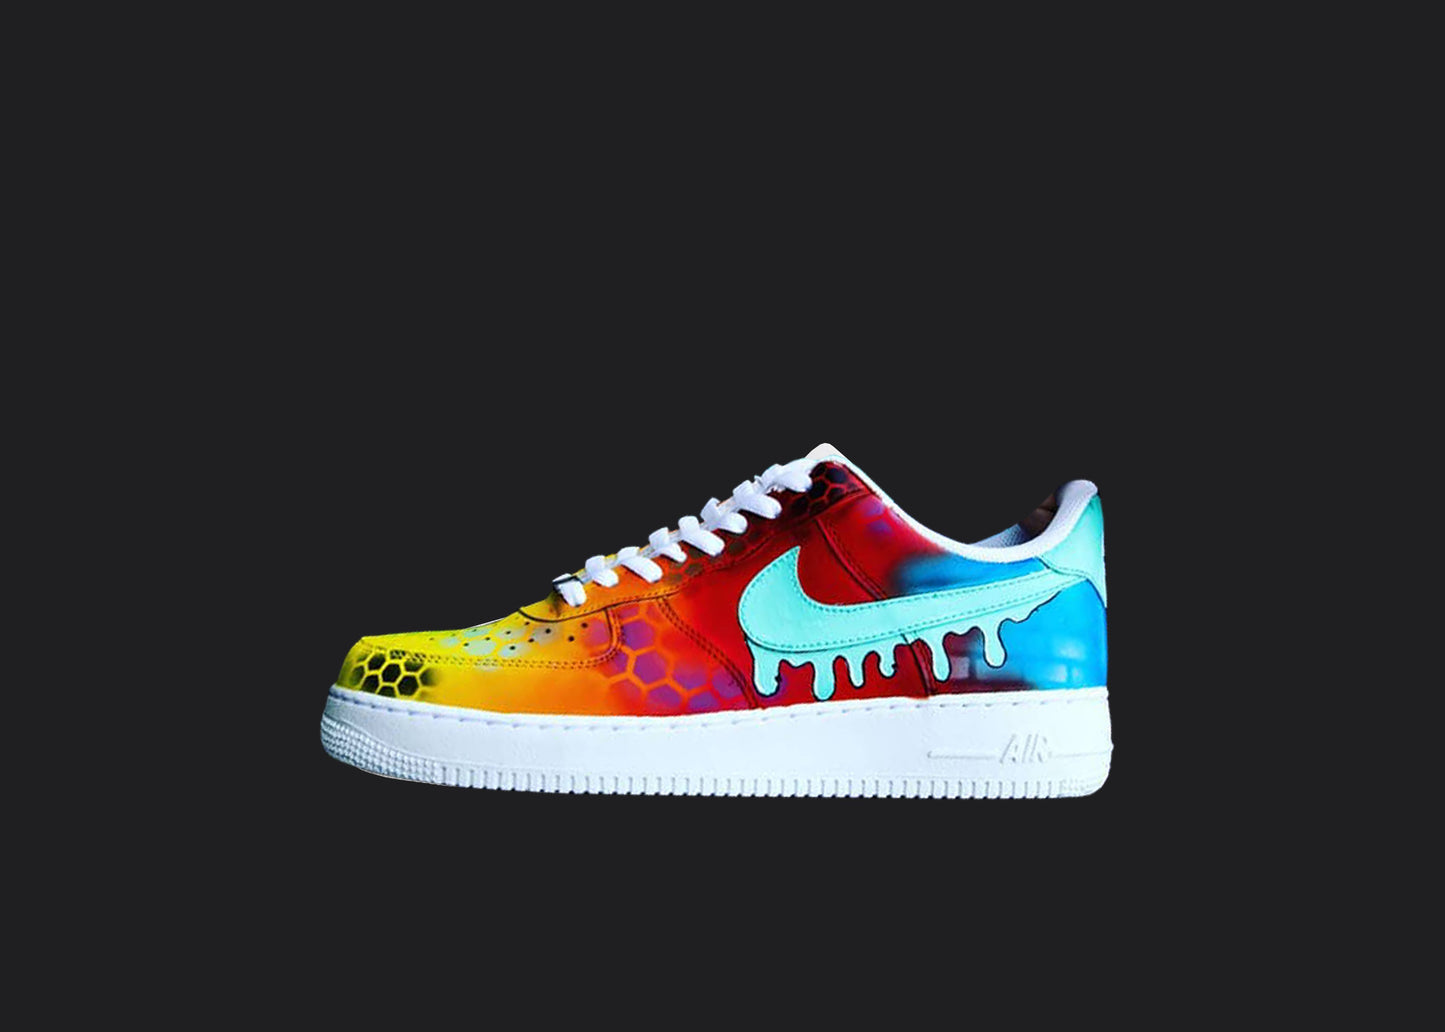 Custom Air Force 1 sneakers with a vibrant color fade from yellow to blue, featuring hexed patterns and a dripping blue Nike swoosh